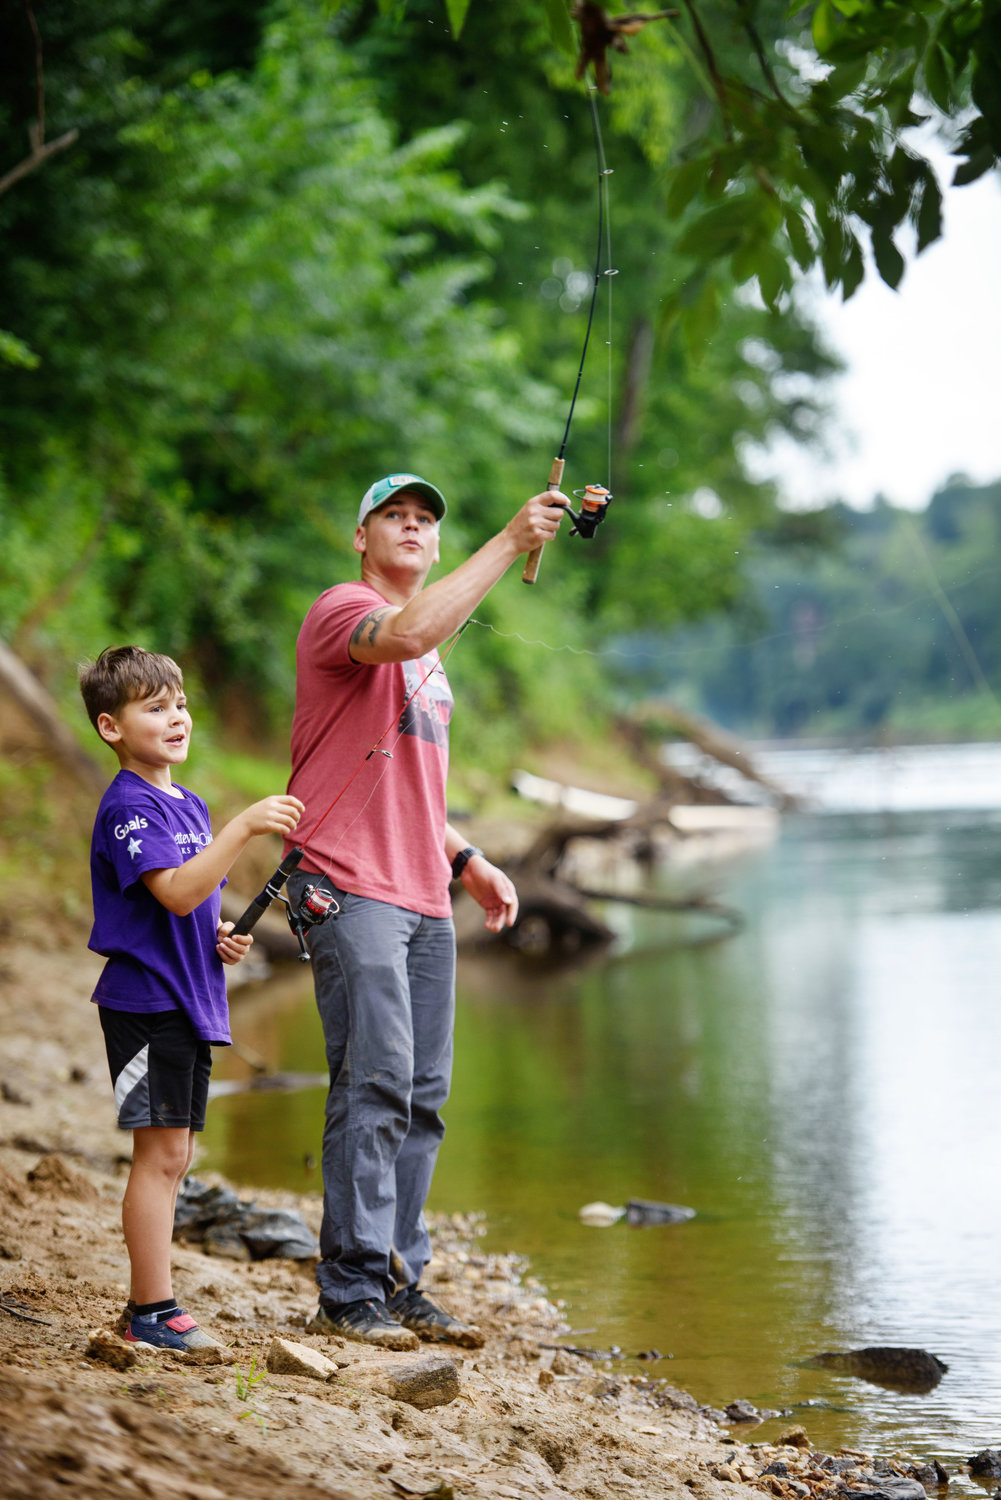 UP THE LAZY RIVER: There’s nothin’ like fishin’ to bring a father and son together for some quiet time down by the river. Roman Stophel, 7, watches his dad, Nathan Stophel, try his luck reeling in catfish and bluegill on the Cape Fear River, which winds its way southeast of Fayetteville and empties into the Atlantic Ocean south of Wilmington. Trails, parks and natural showcases like Cape Fear Botanical Garden provide vistas that let you go with the flow.